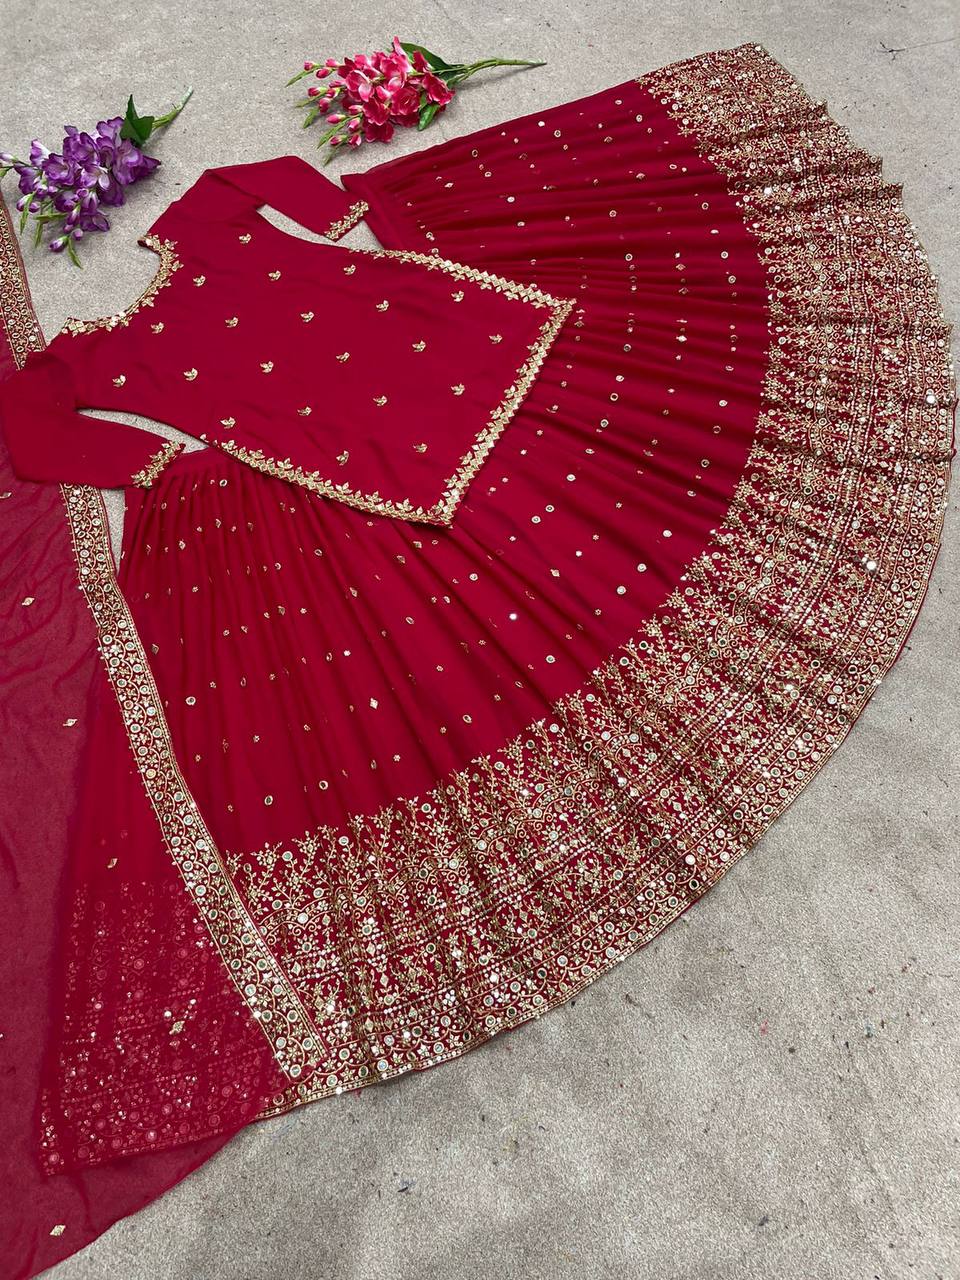 Marvelous Embroidery Work Pink Color Lehenga With Top